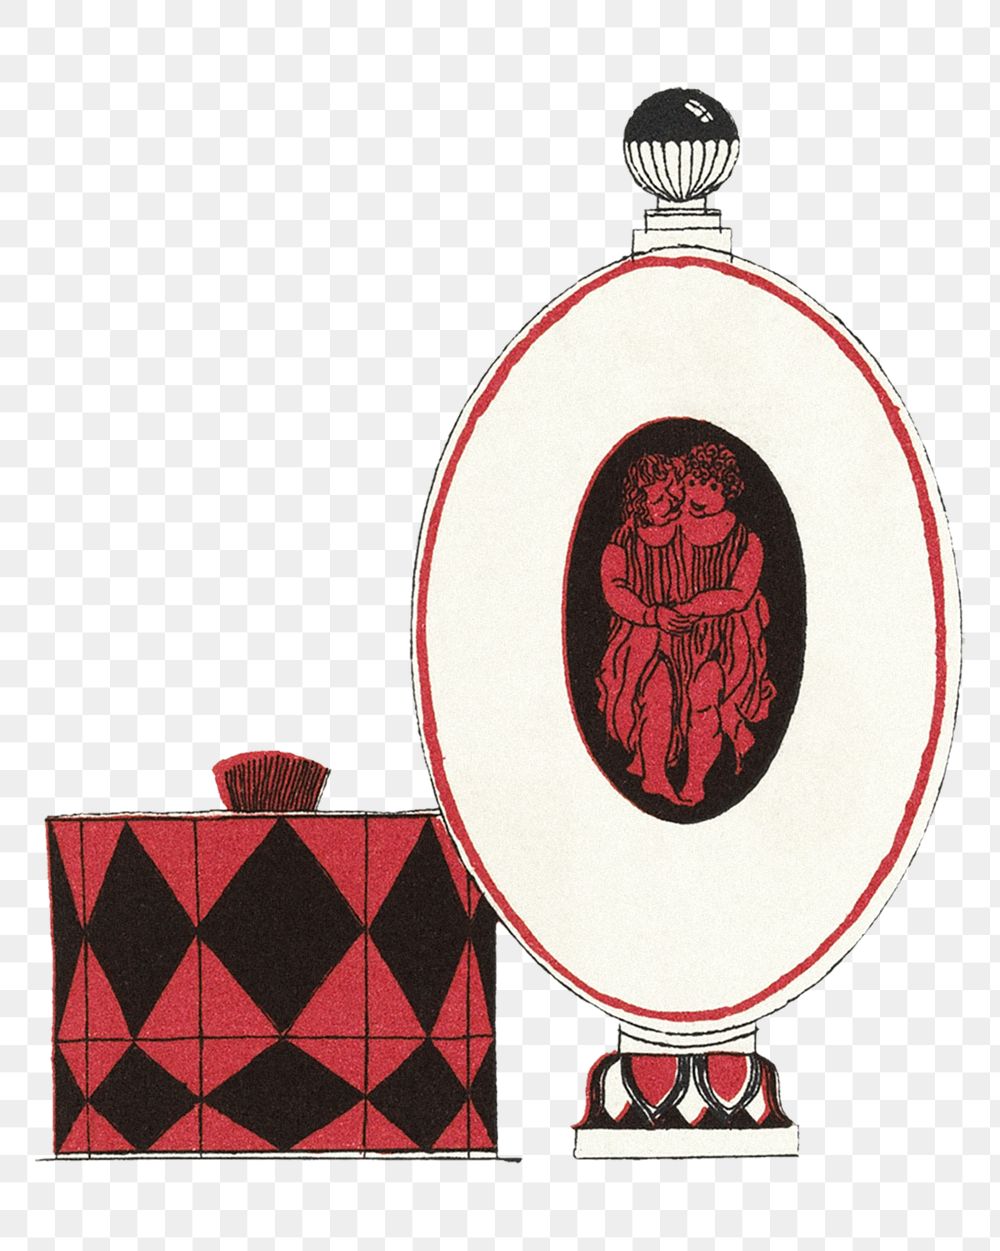 Vintage png red perfume bottle, remixed from the artworks by Mario Simon